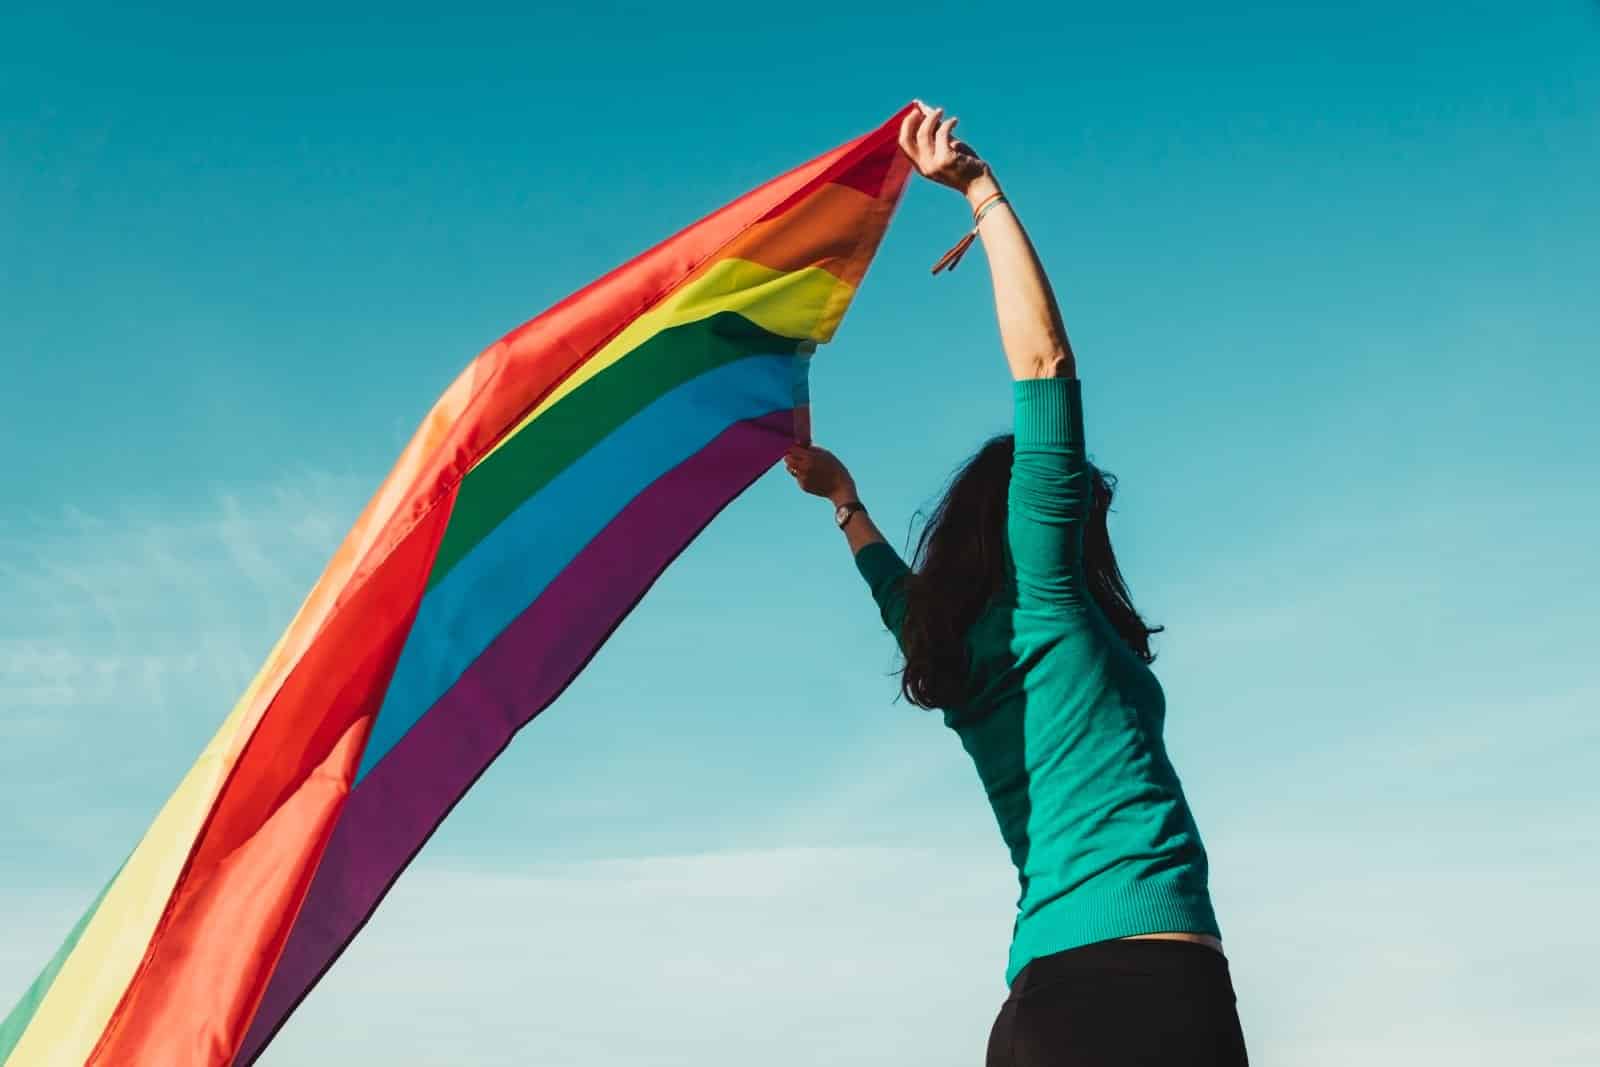 <p class="wp-caption-text">Image Credit: Shutterstock / AlvaroMP</p>  <p>While progress has been made in advancing LGBTQ+ rights, discussions about issues such as marriage equality, transgender rights, and discrimination can provoke strong reactions and backlash from those opposed to equality.</p>